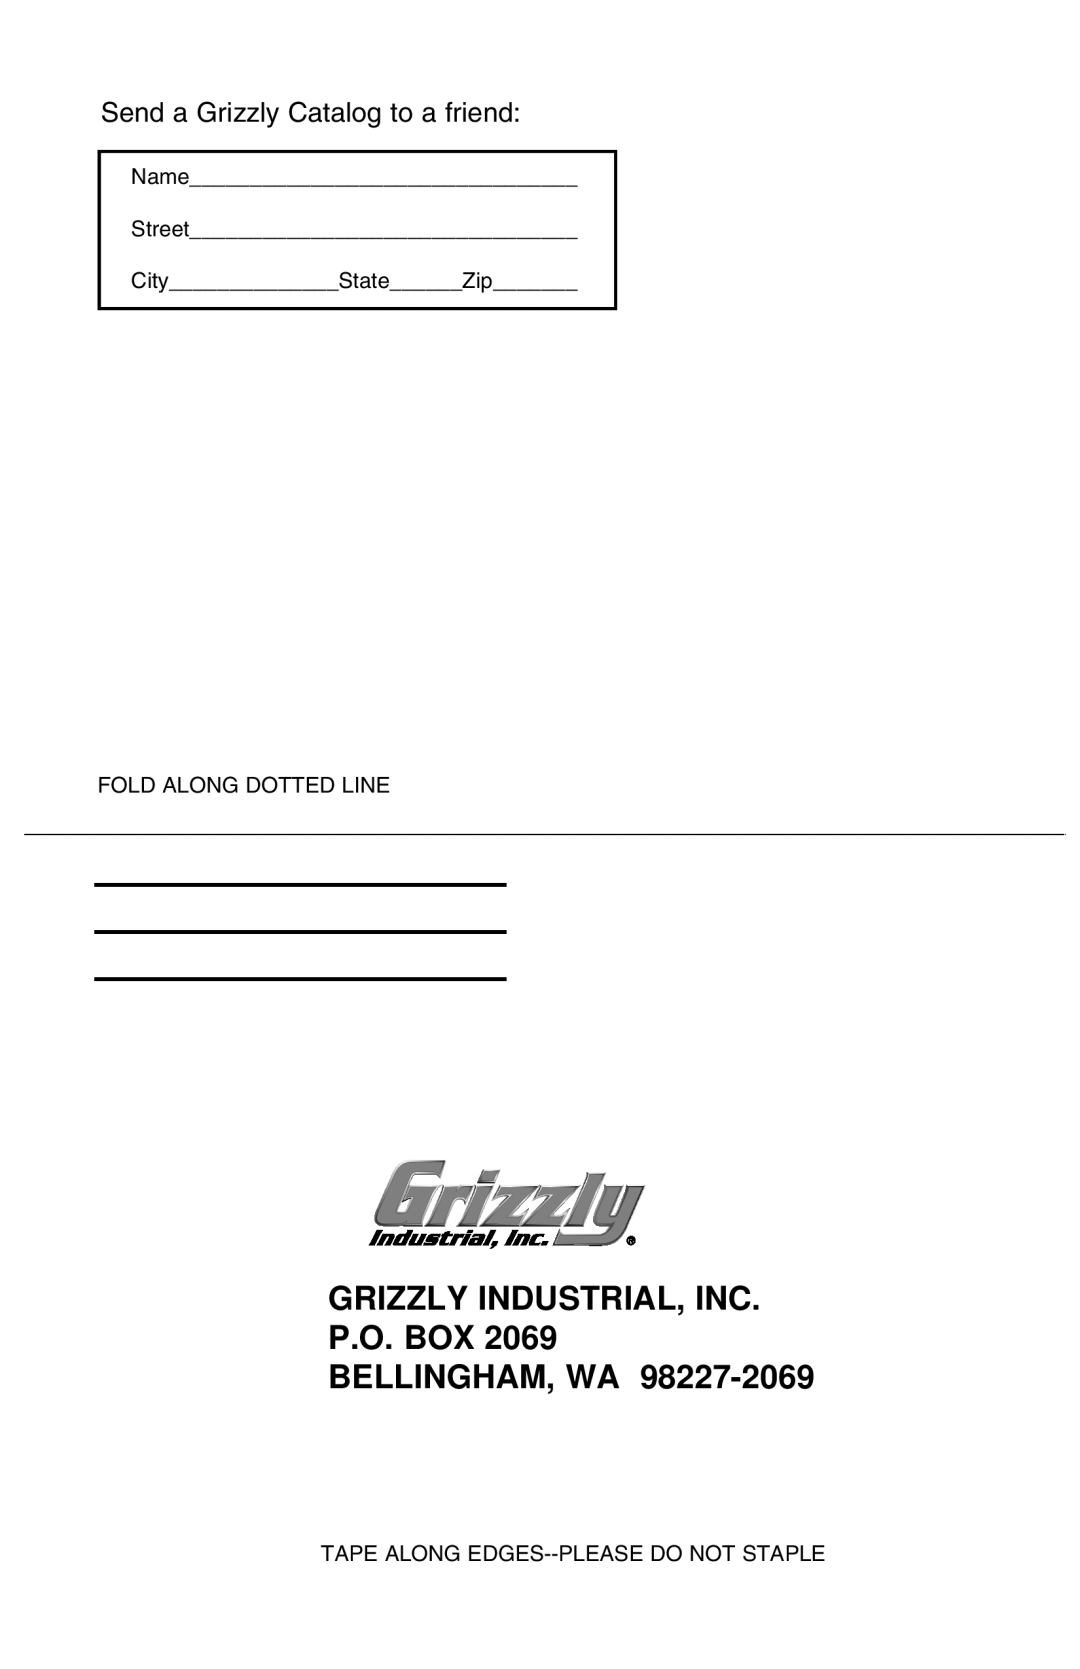 Grizzly H0602 instruction manual Grizzly Industrial, Inc P.O. Box Bellingham, Wa, Send a Grizzly Catalog to a friend 